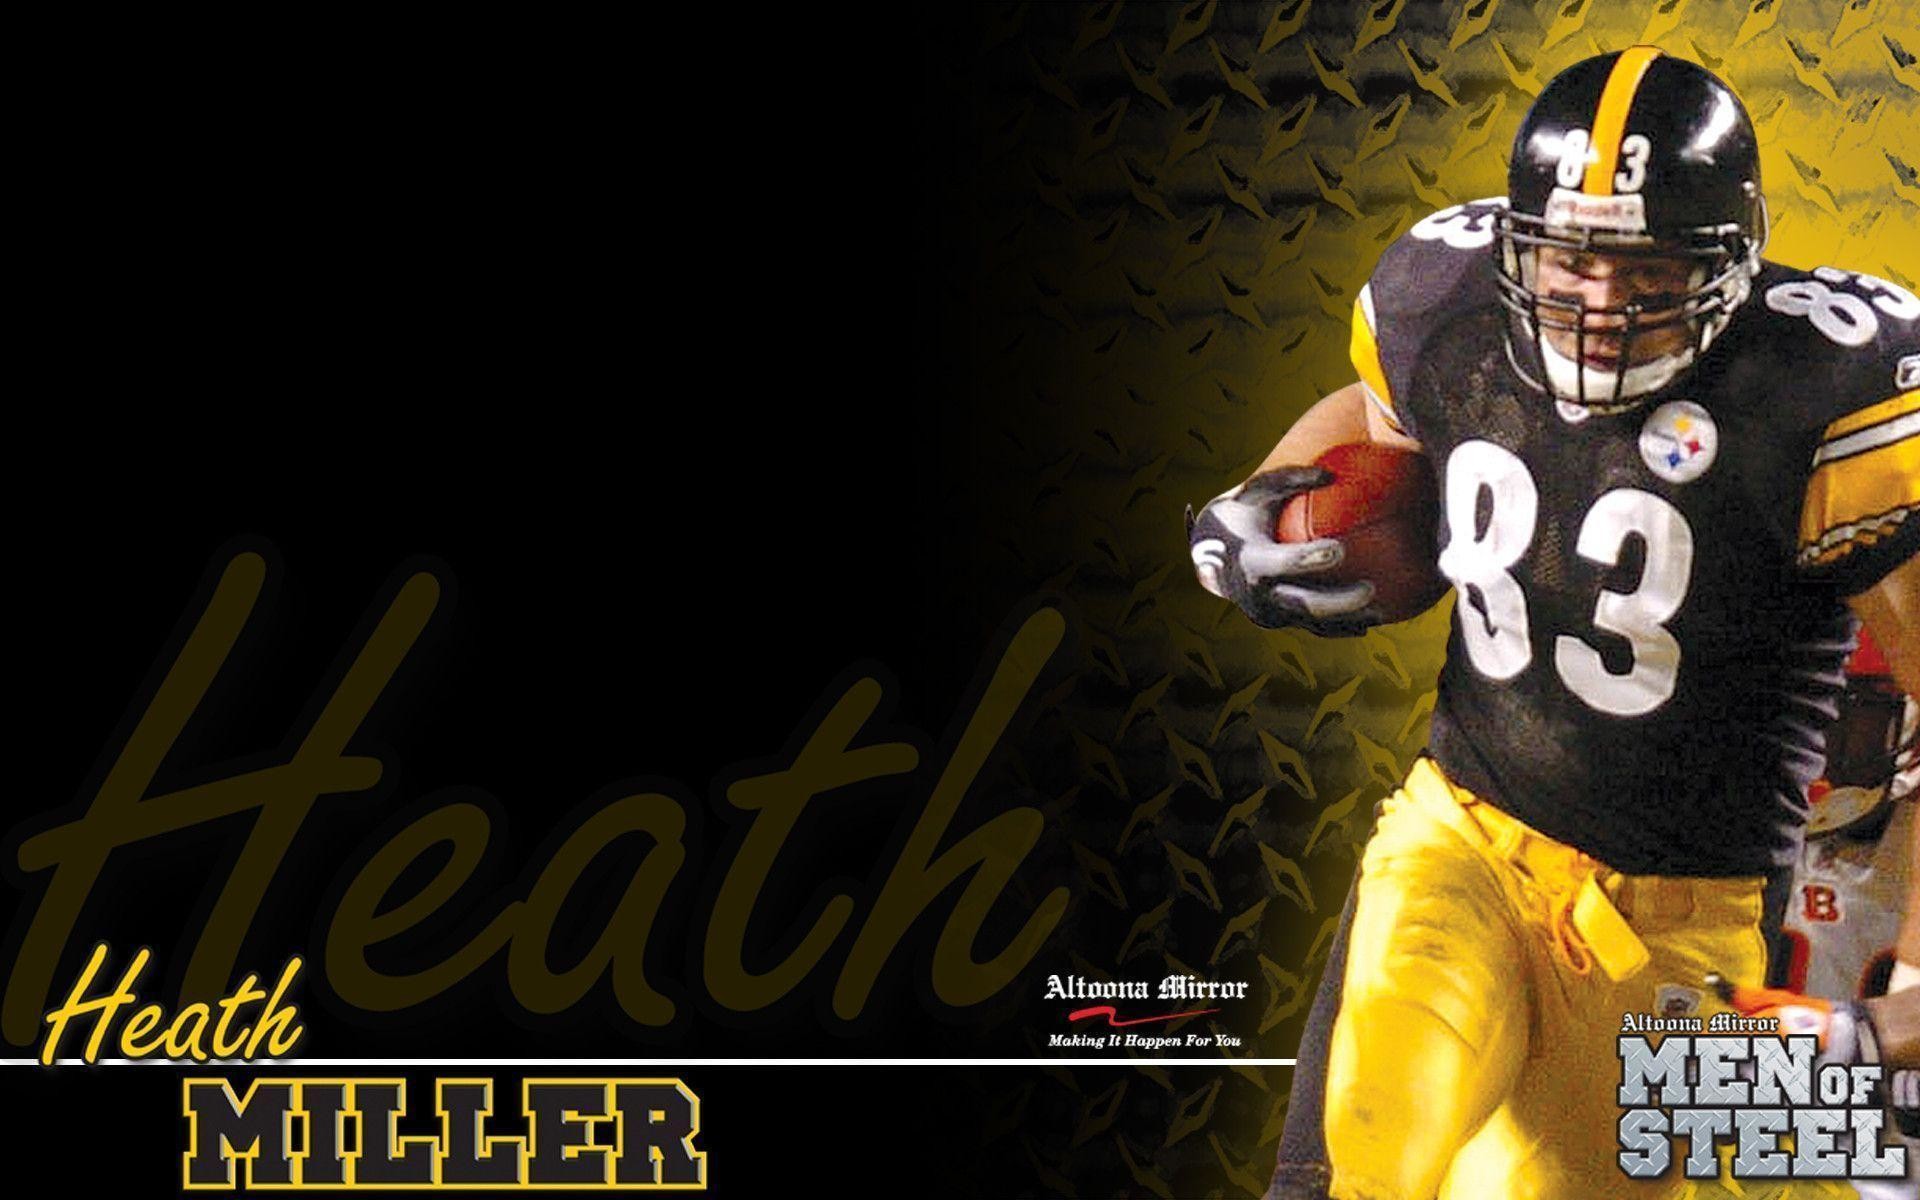 1920x1200 Steelers Backgrounds 2577 Wallpaper - Res: 1024x768 - backgrounds .